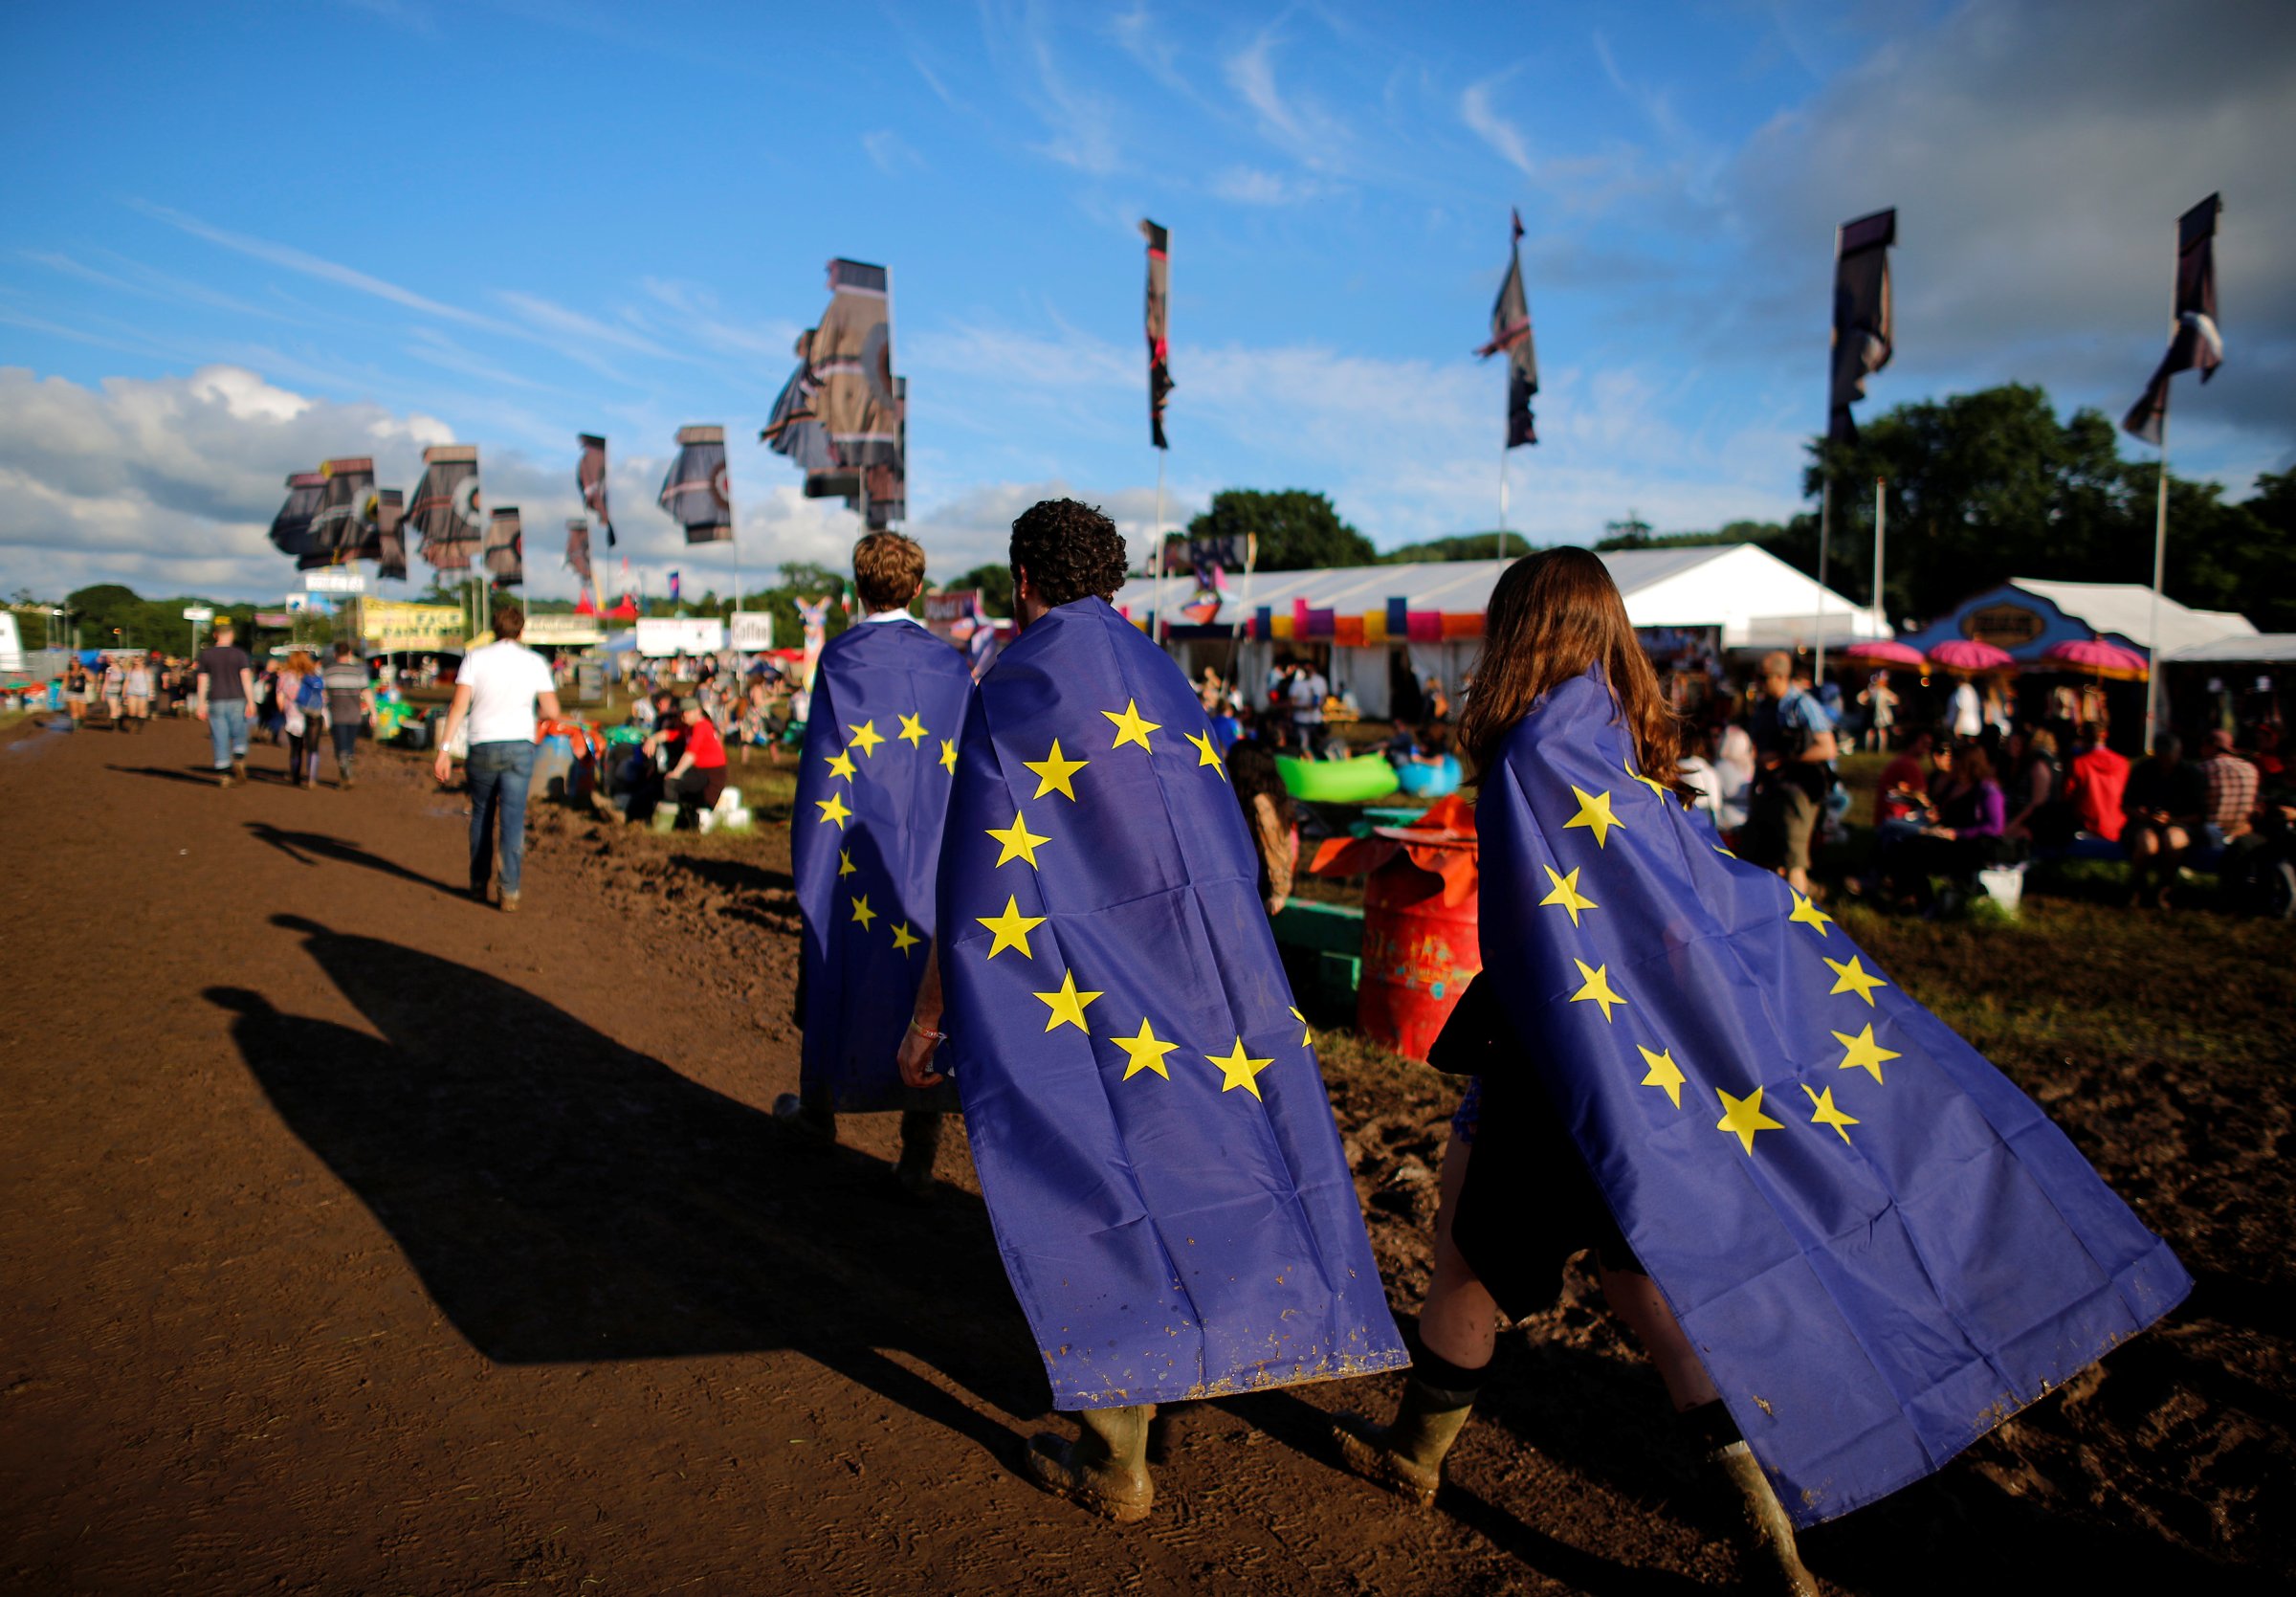 Revellers wrapped in European Union flags walk at Worthy Farm in Somerset during the Glastonbury Festival